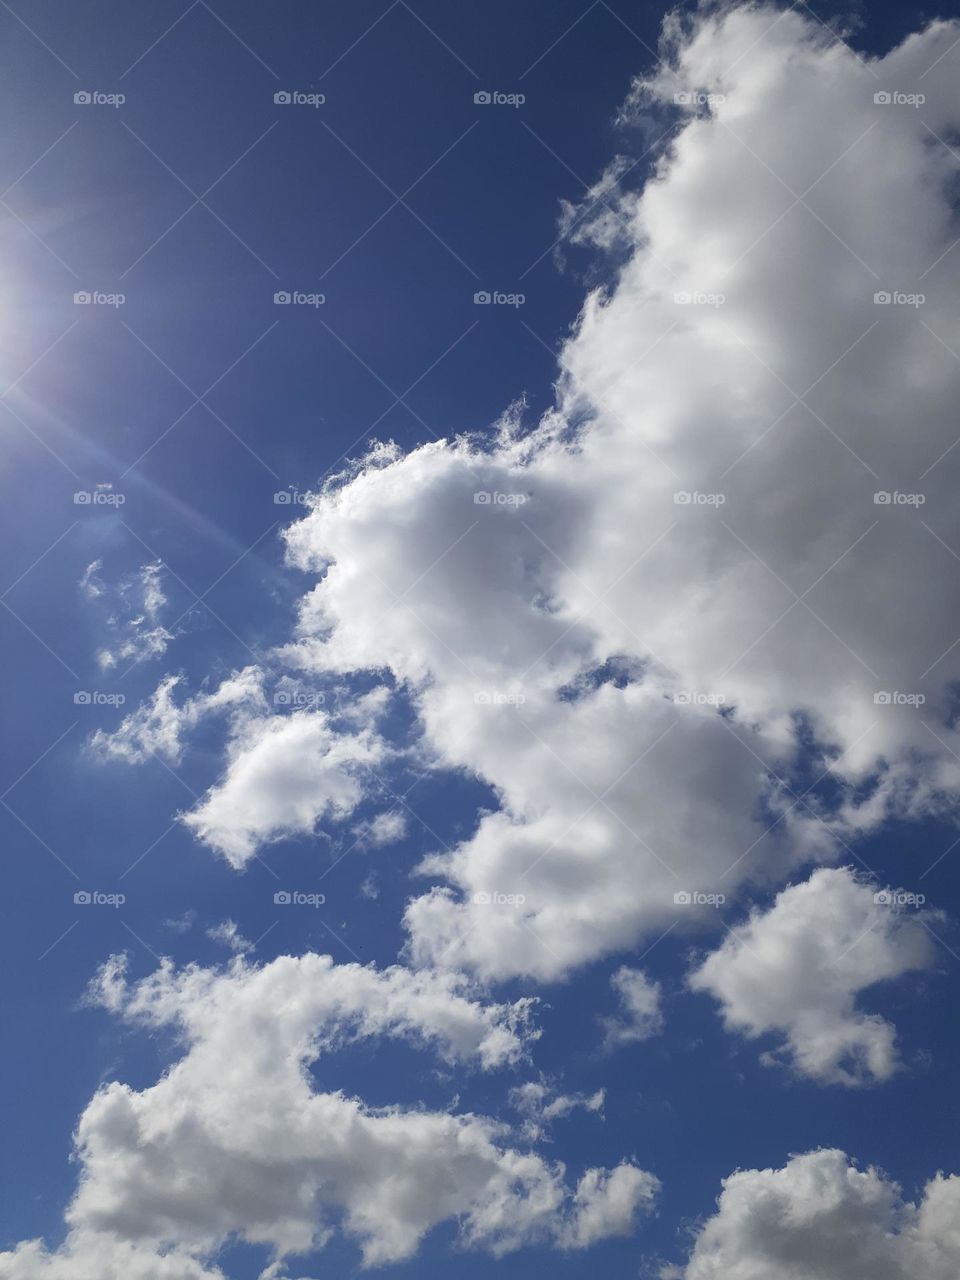 I was inside when I looked outside and saw a beautiful sky that I just had to take a picture of. Beautiful blue sky and white clouds with sun shining over Florida.